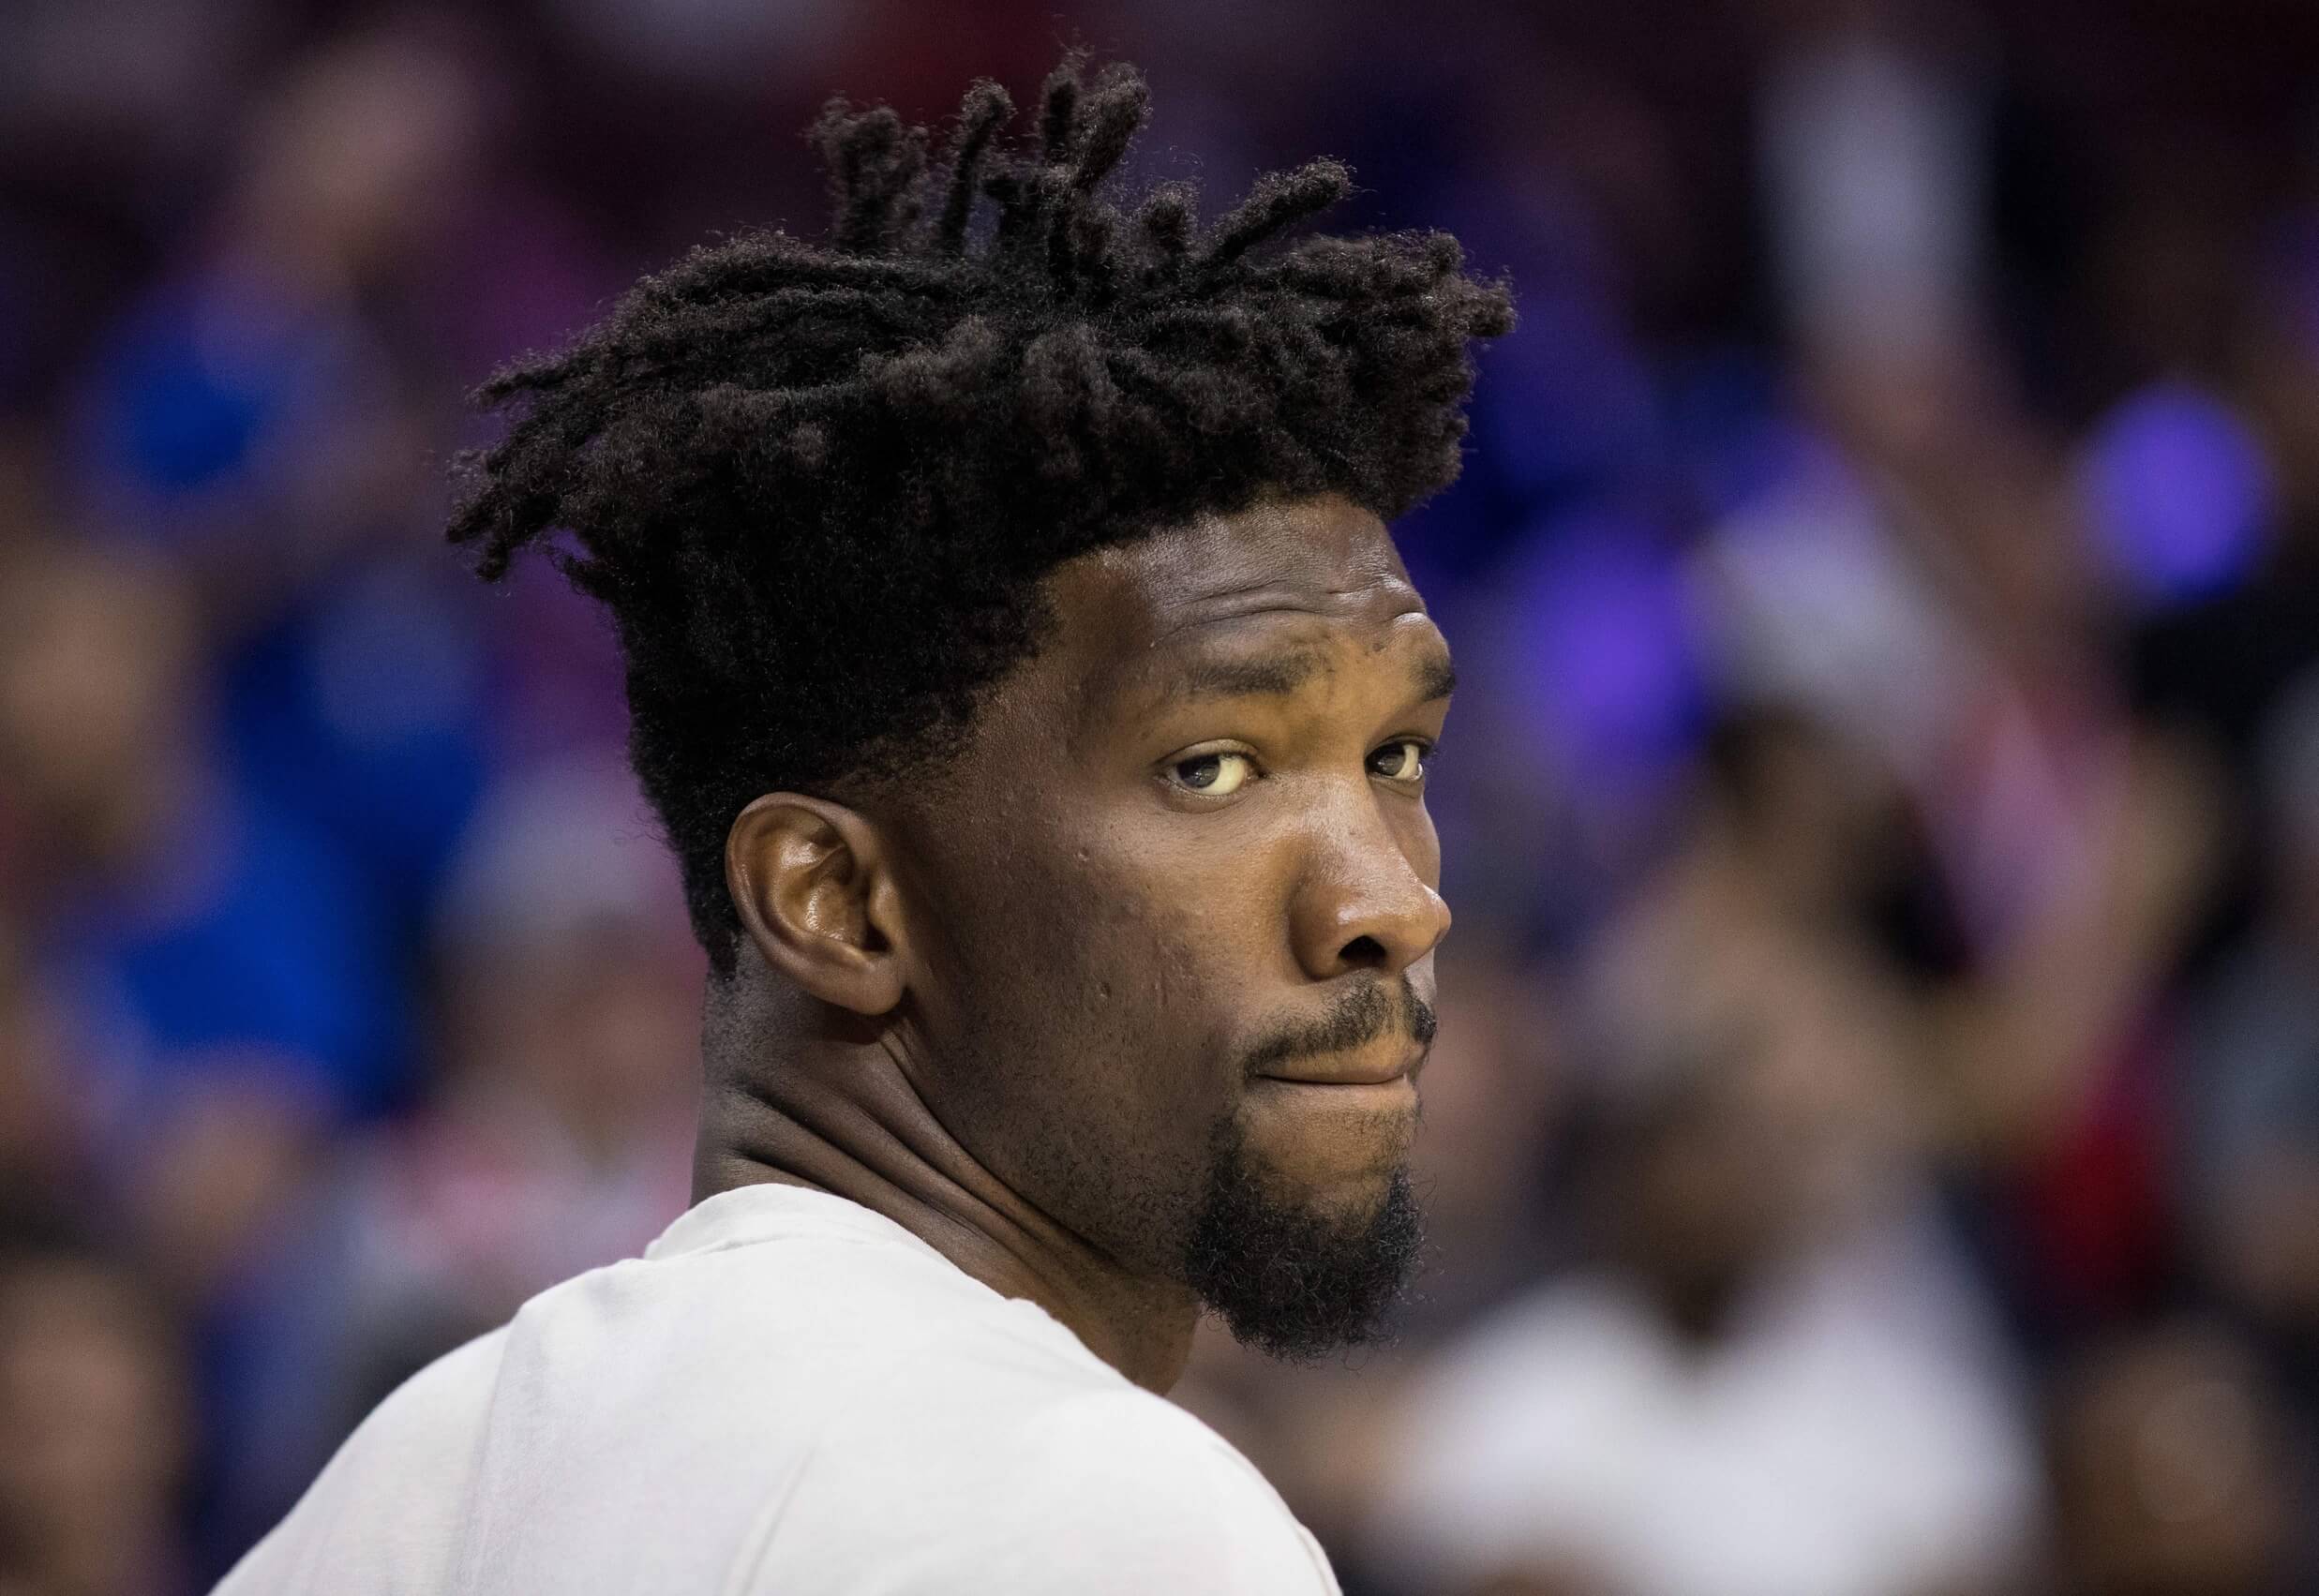 Joel Embiid to sign 5-year, $146.5 million contract with 76ers